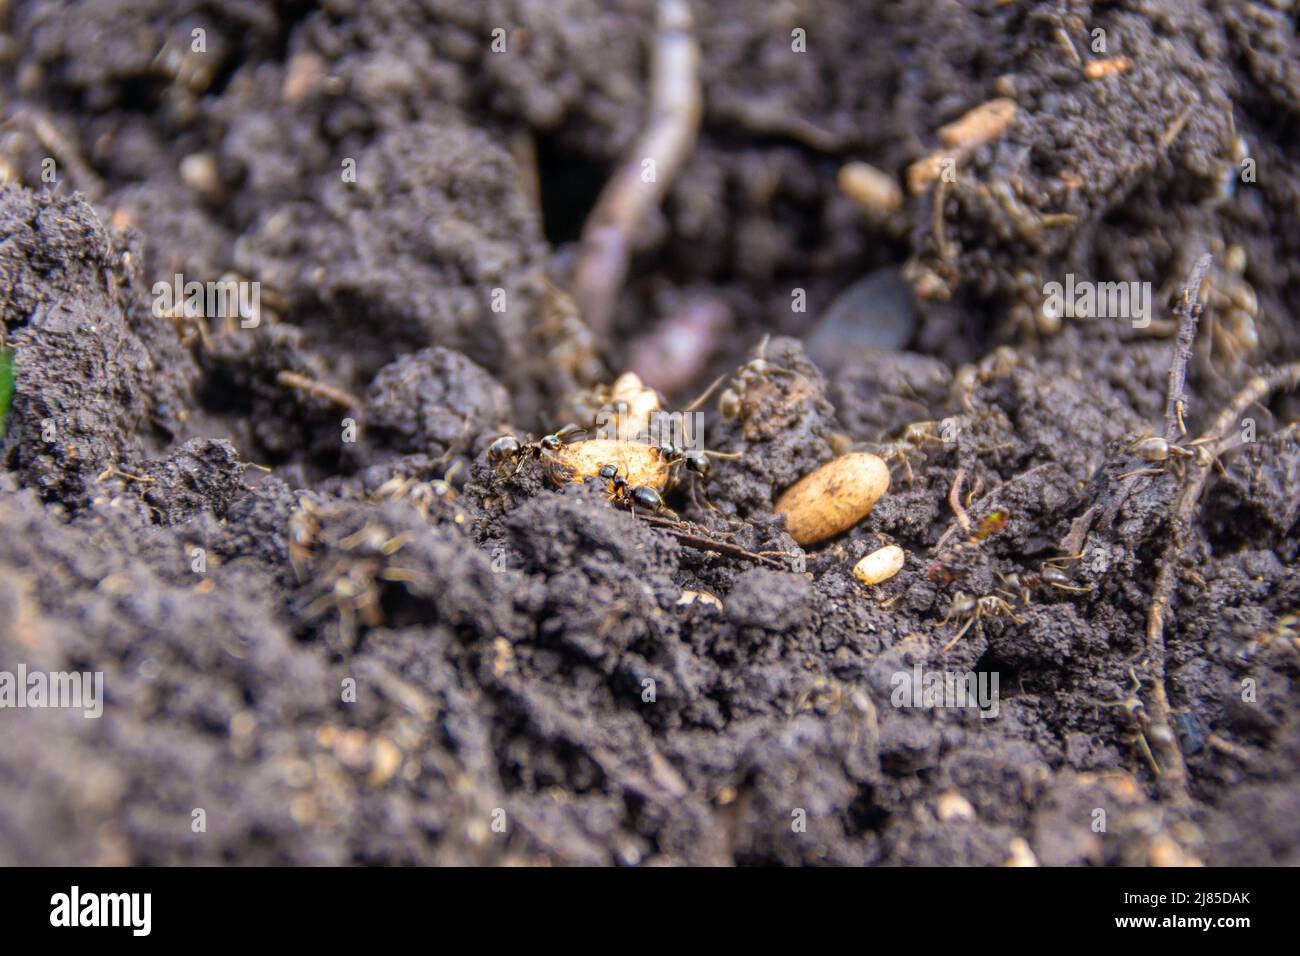 during the digging of the soil, the nest of garden ants was destroyed, which began saving offspring, selective focus Stock Photo